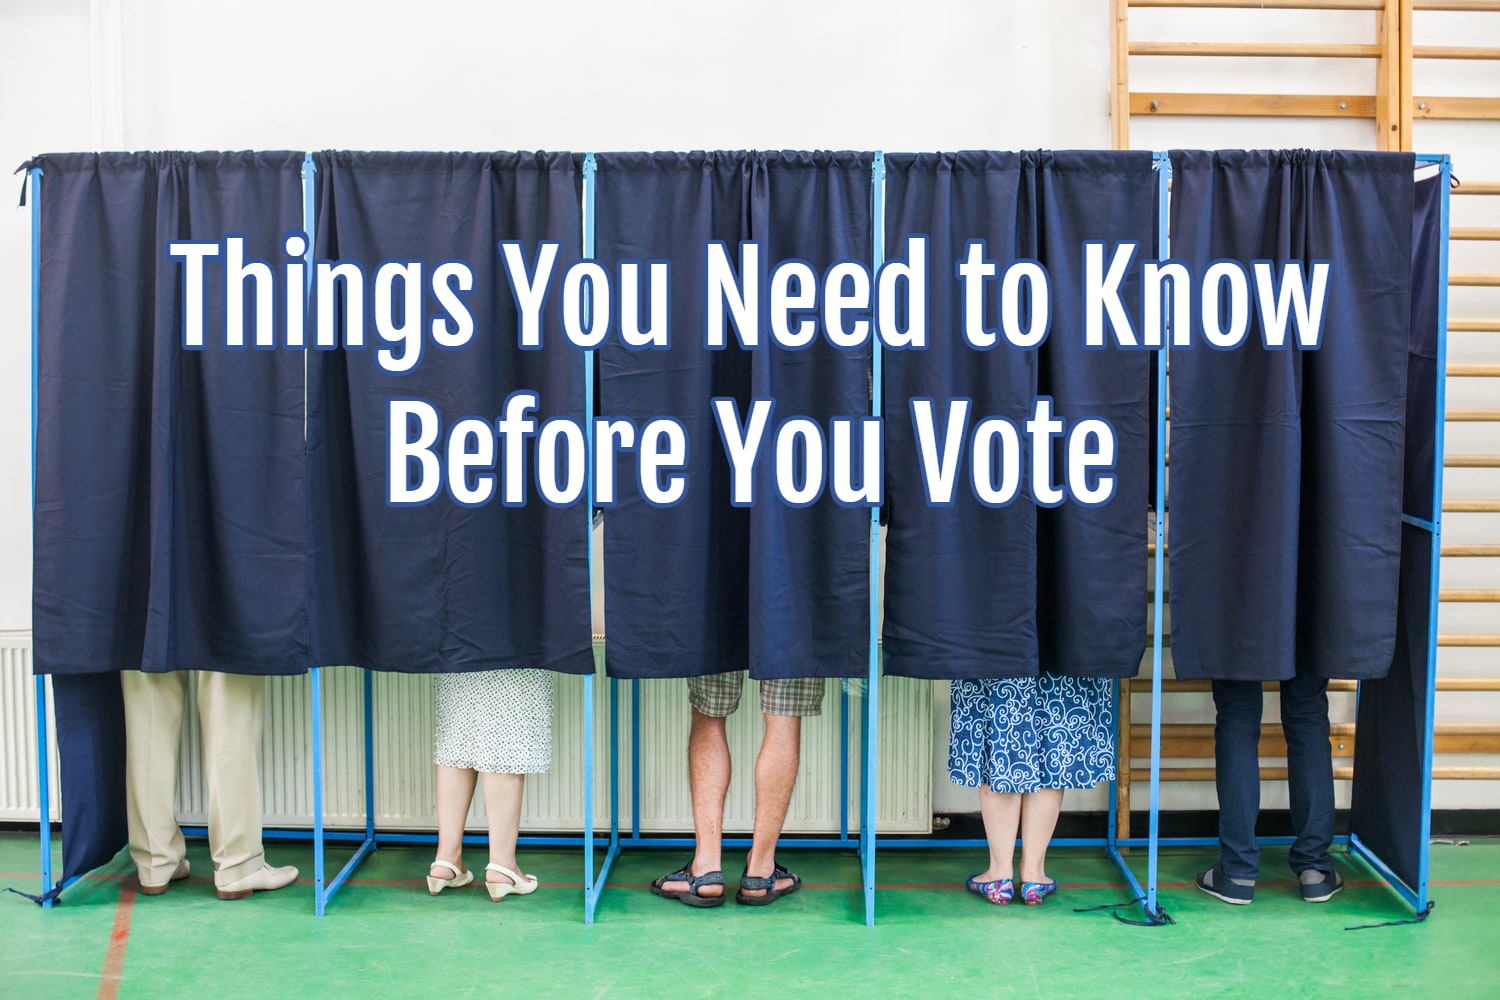 Things You Need to Vote Before You Vote